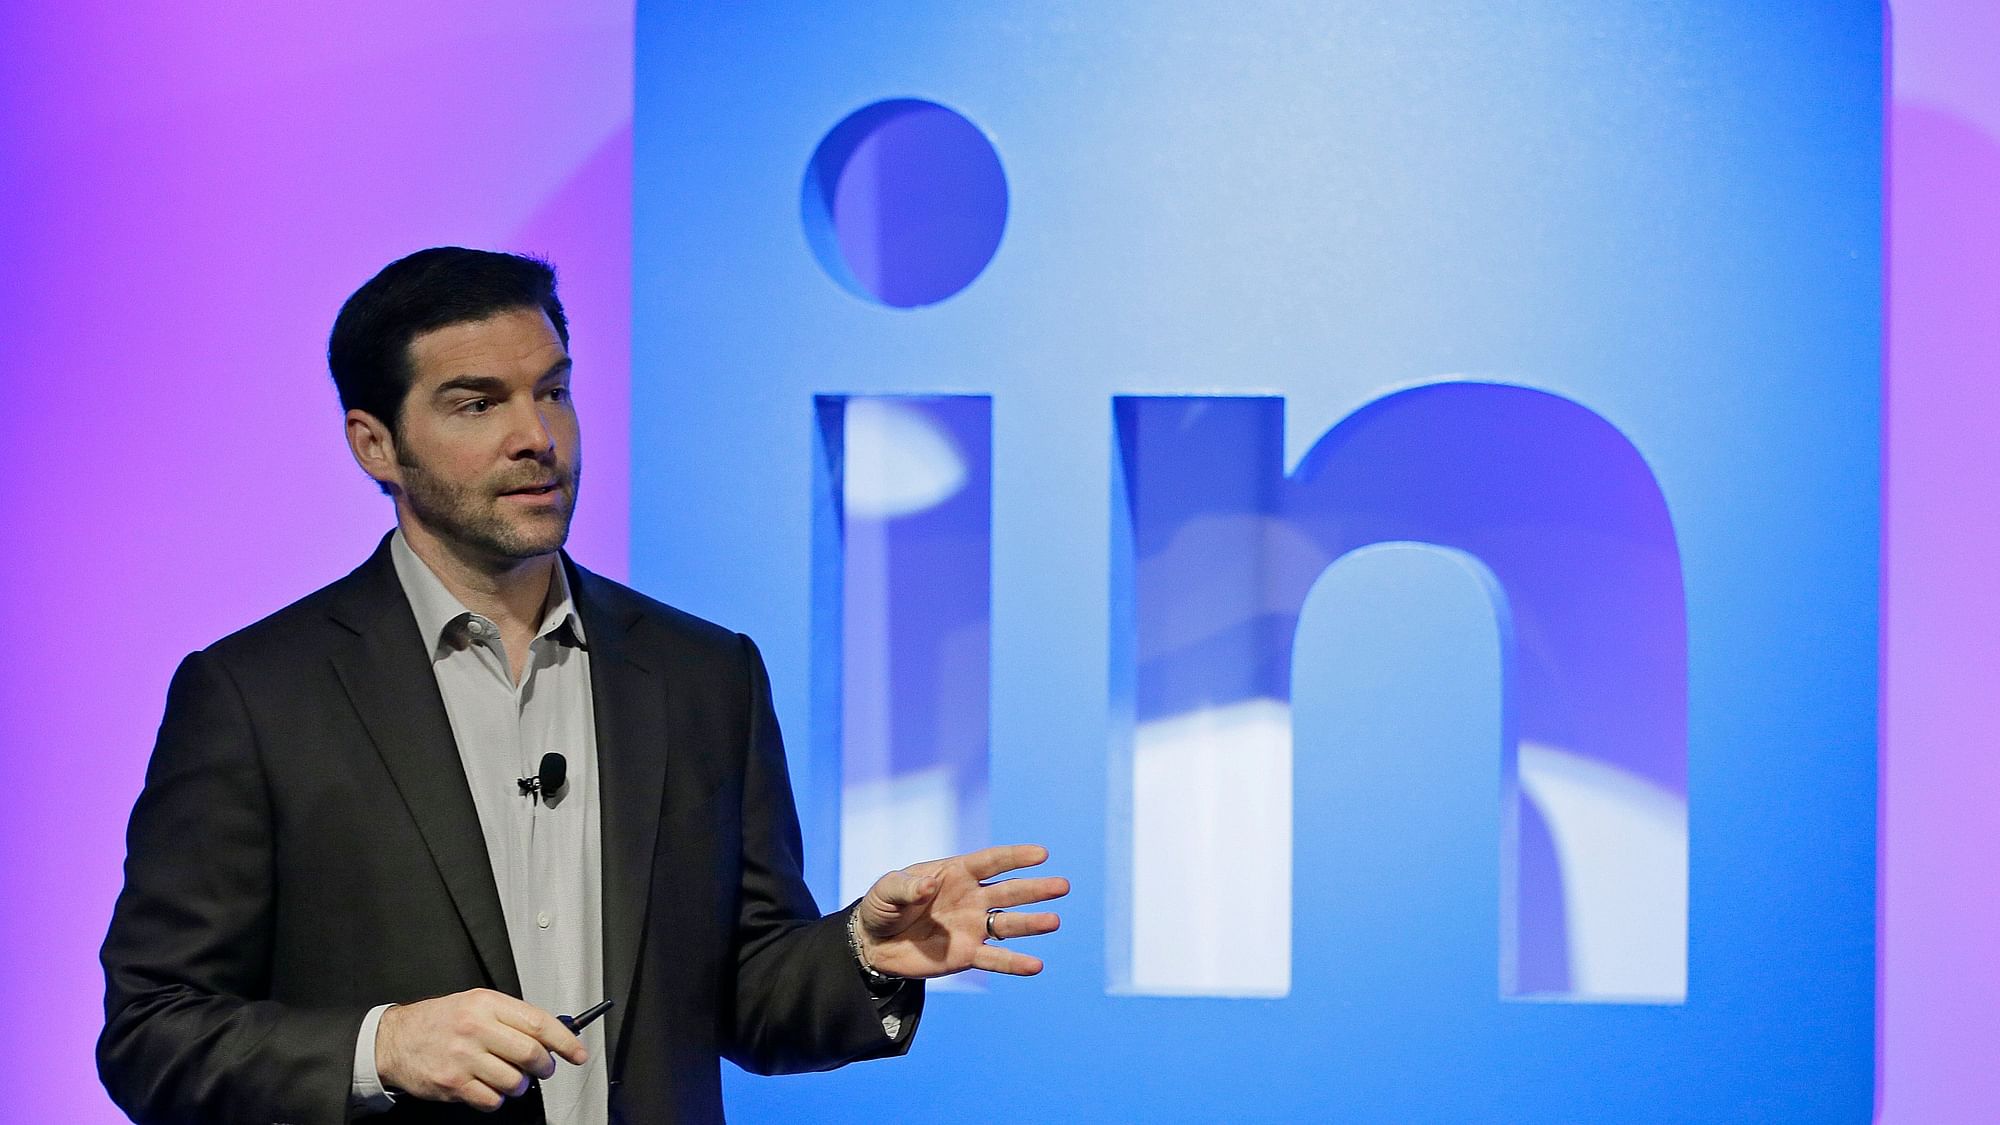 LinkedIn CEO Jeff Weiner speaking during a product announcement at his company’s headquarters in San Francisco, in 2016.